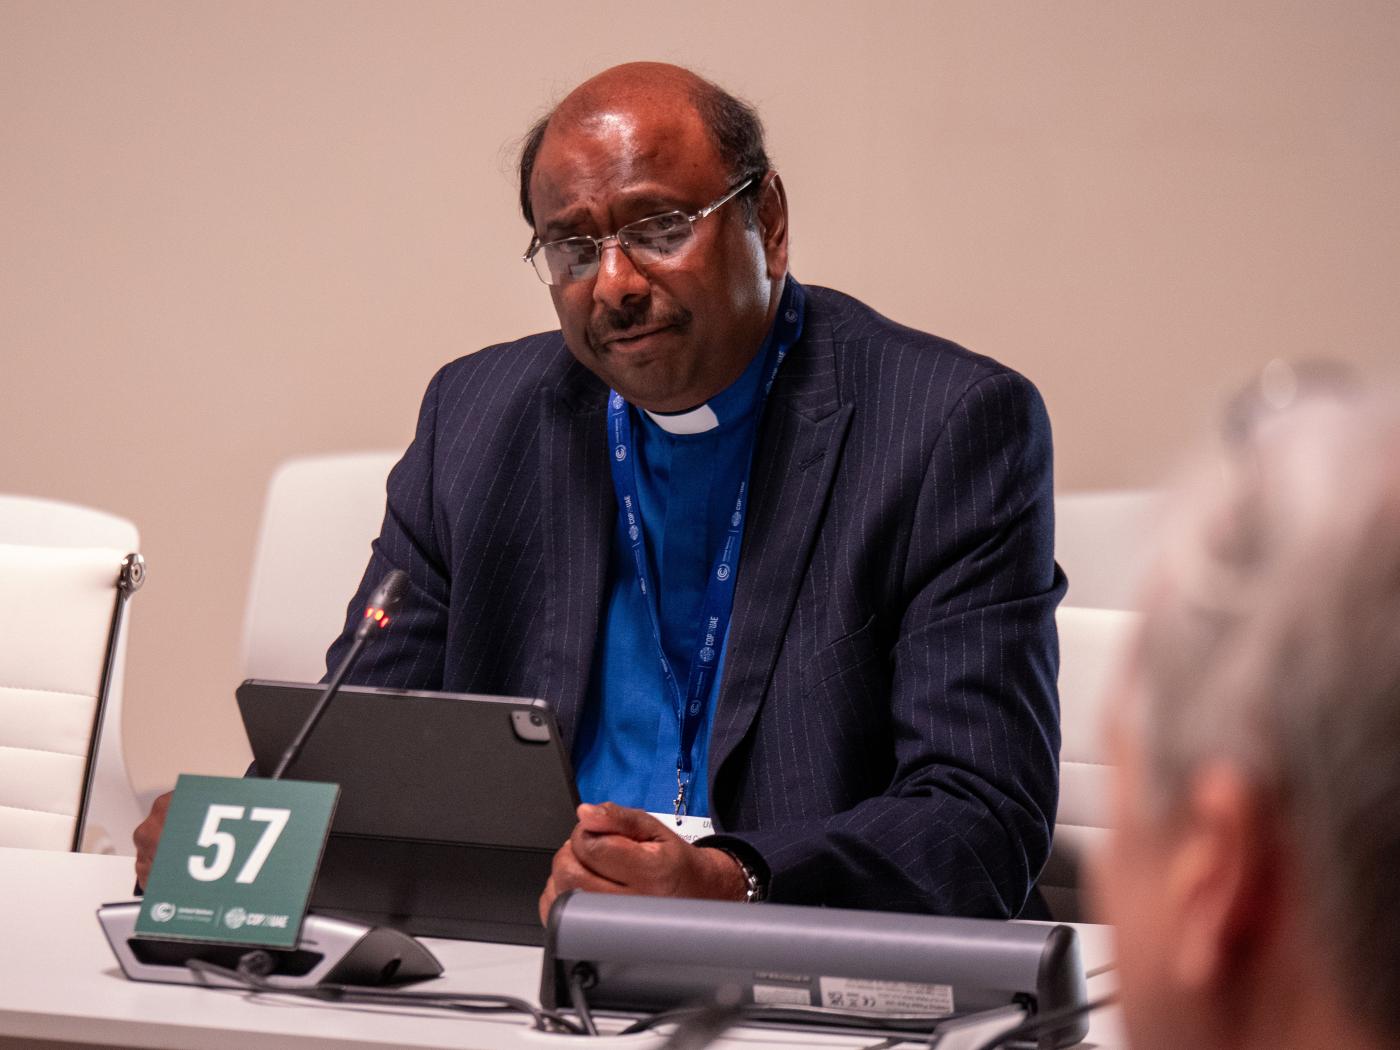 WCC general secretary Rev. Prof. Dr Jerry Pilay speaks at a side event of COP28 in Dubai, United Arab Emirates.